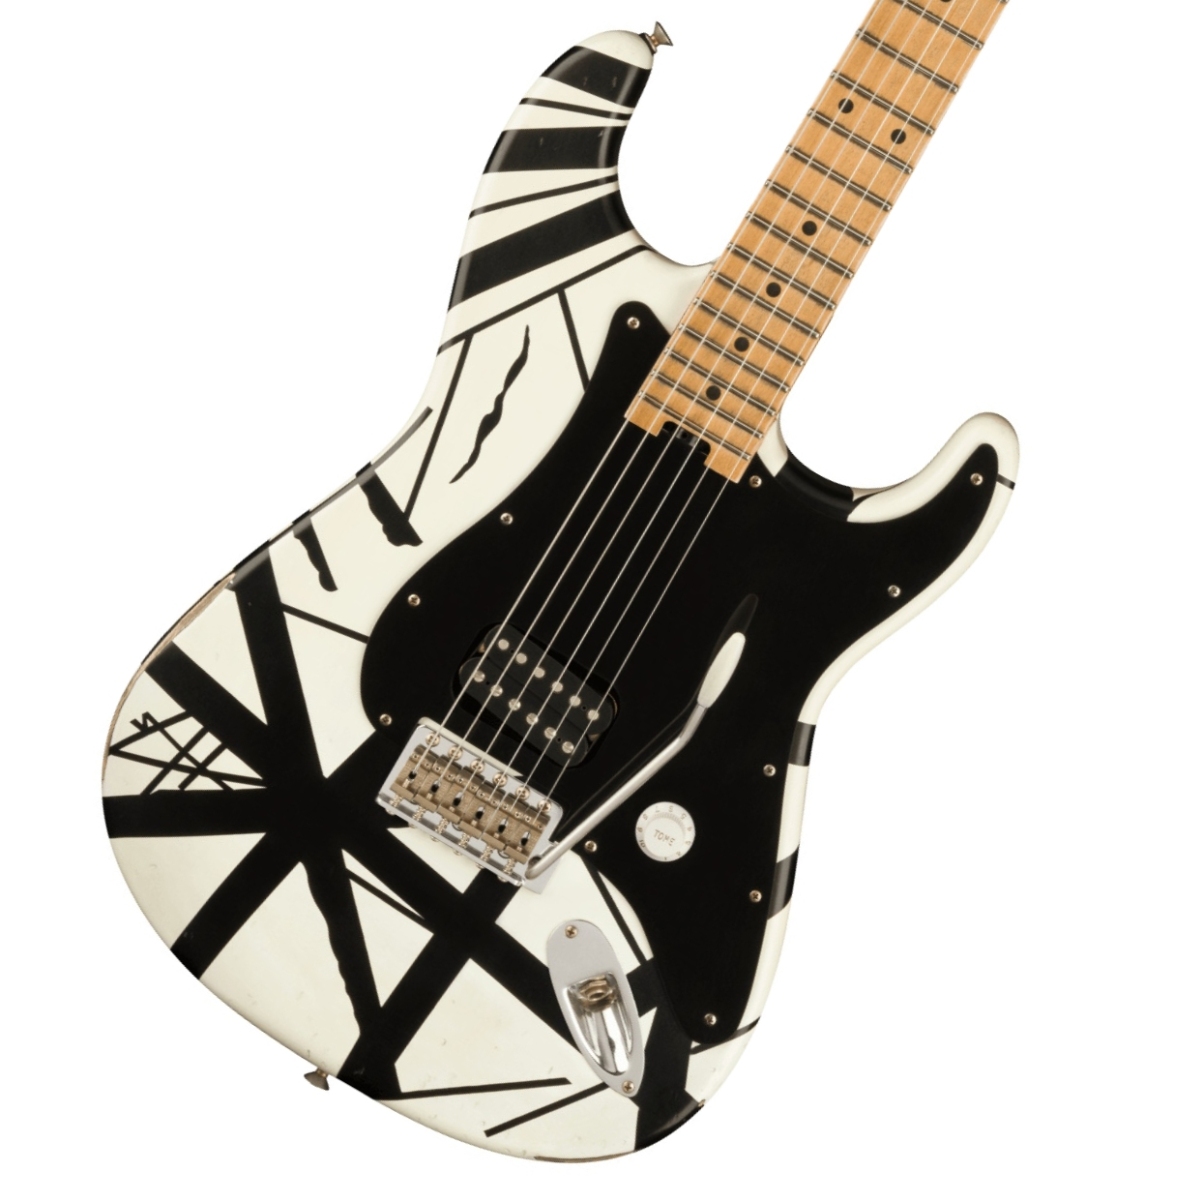 Fingerboard　Black　Series　Eruption　WEBSHOPクリアランスセール》EVH　イシバシ楽器　Maple　イーブイエイチ　White　Striped　Stripes　Relic　'78　with